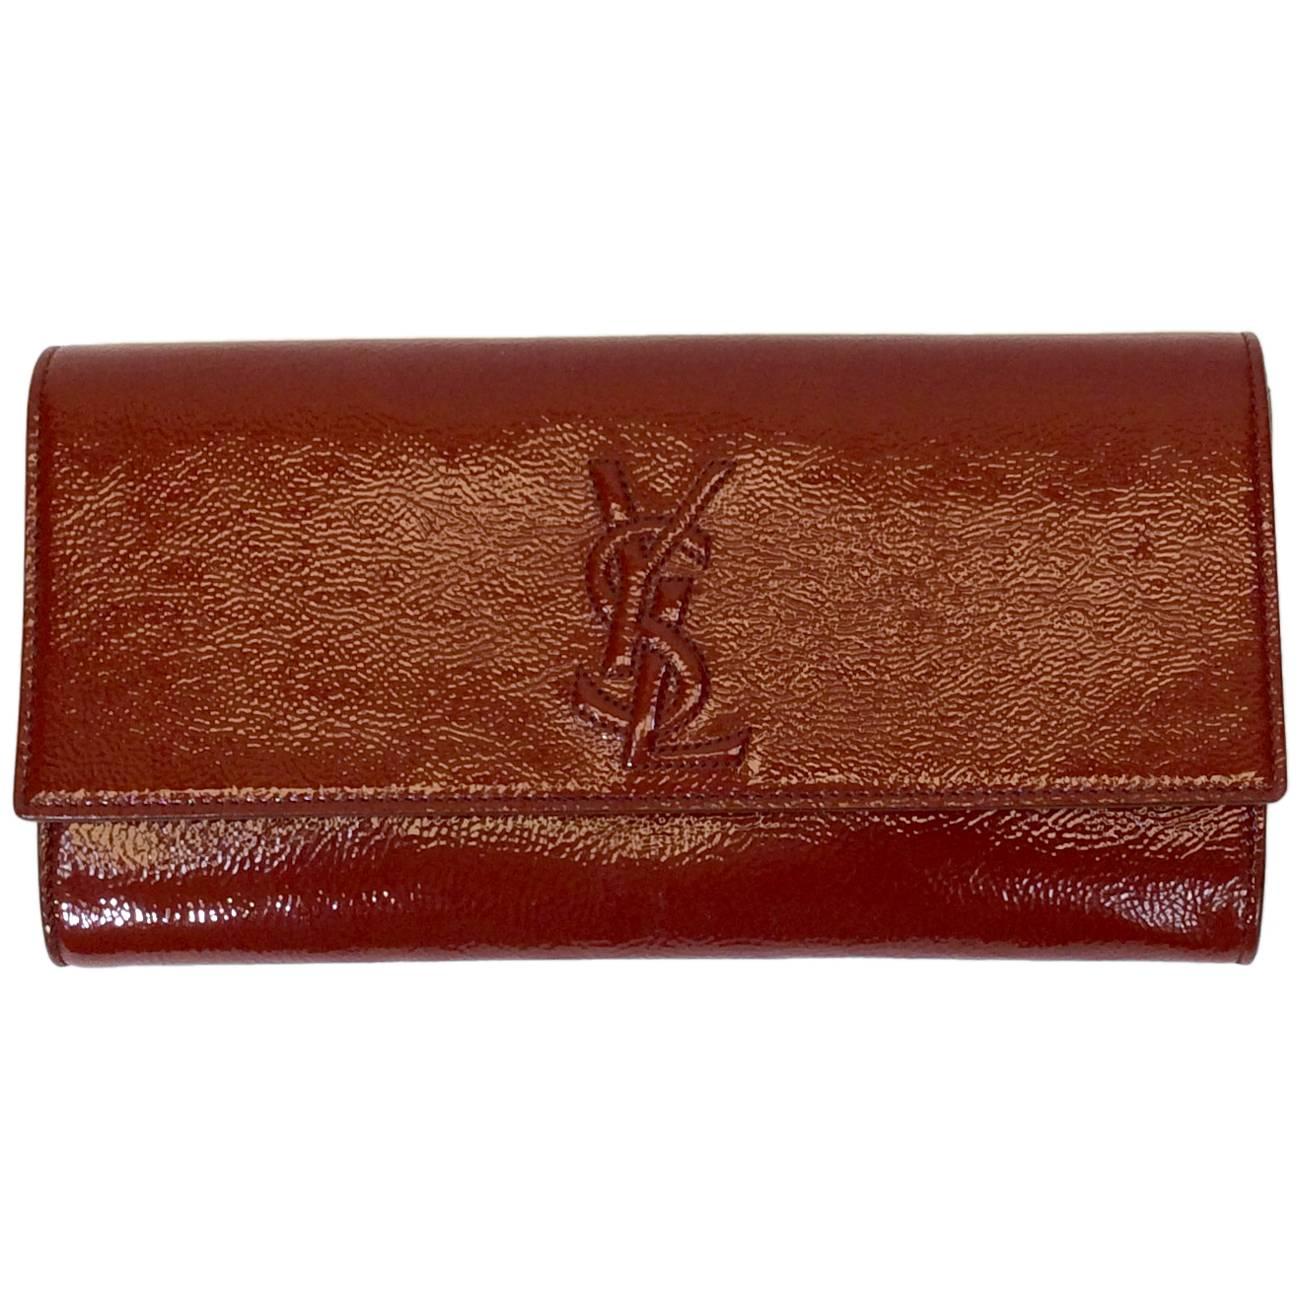 Yves Saint Laurent Rust Patent Leather Clutch For Sale